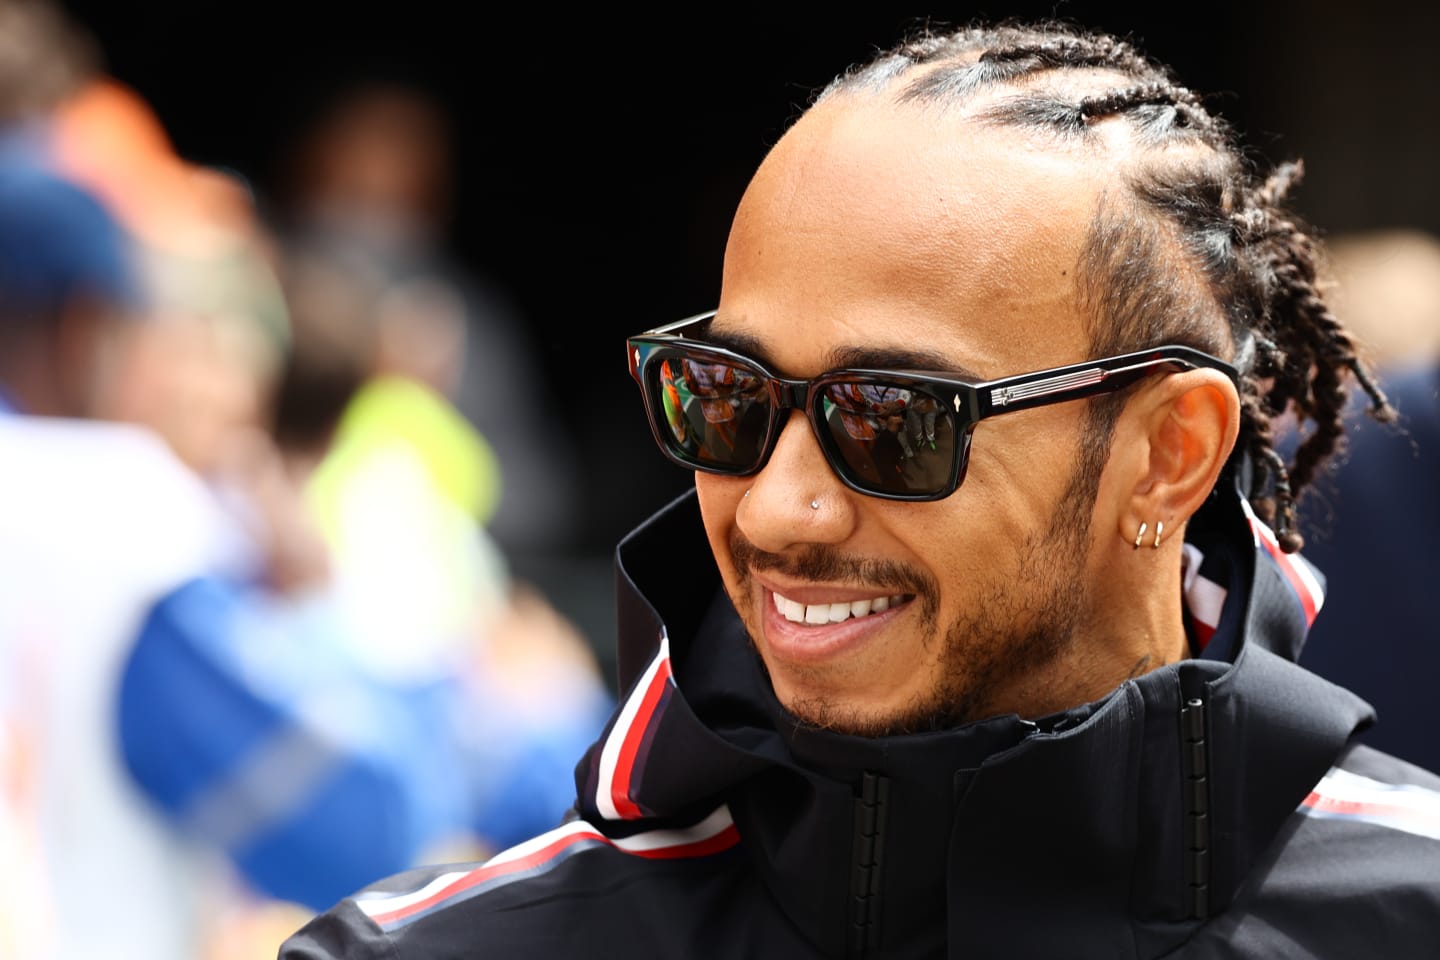 Lewis Hamilton of Mercedes before the Formula 1 Belgian Grand Prix at Spa-Francorchamps in Spa,